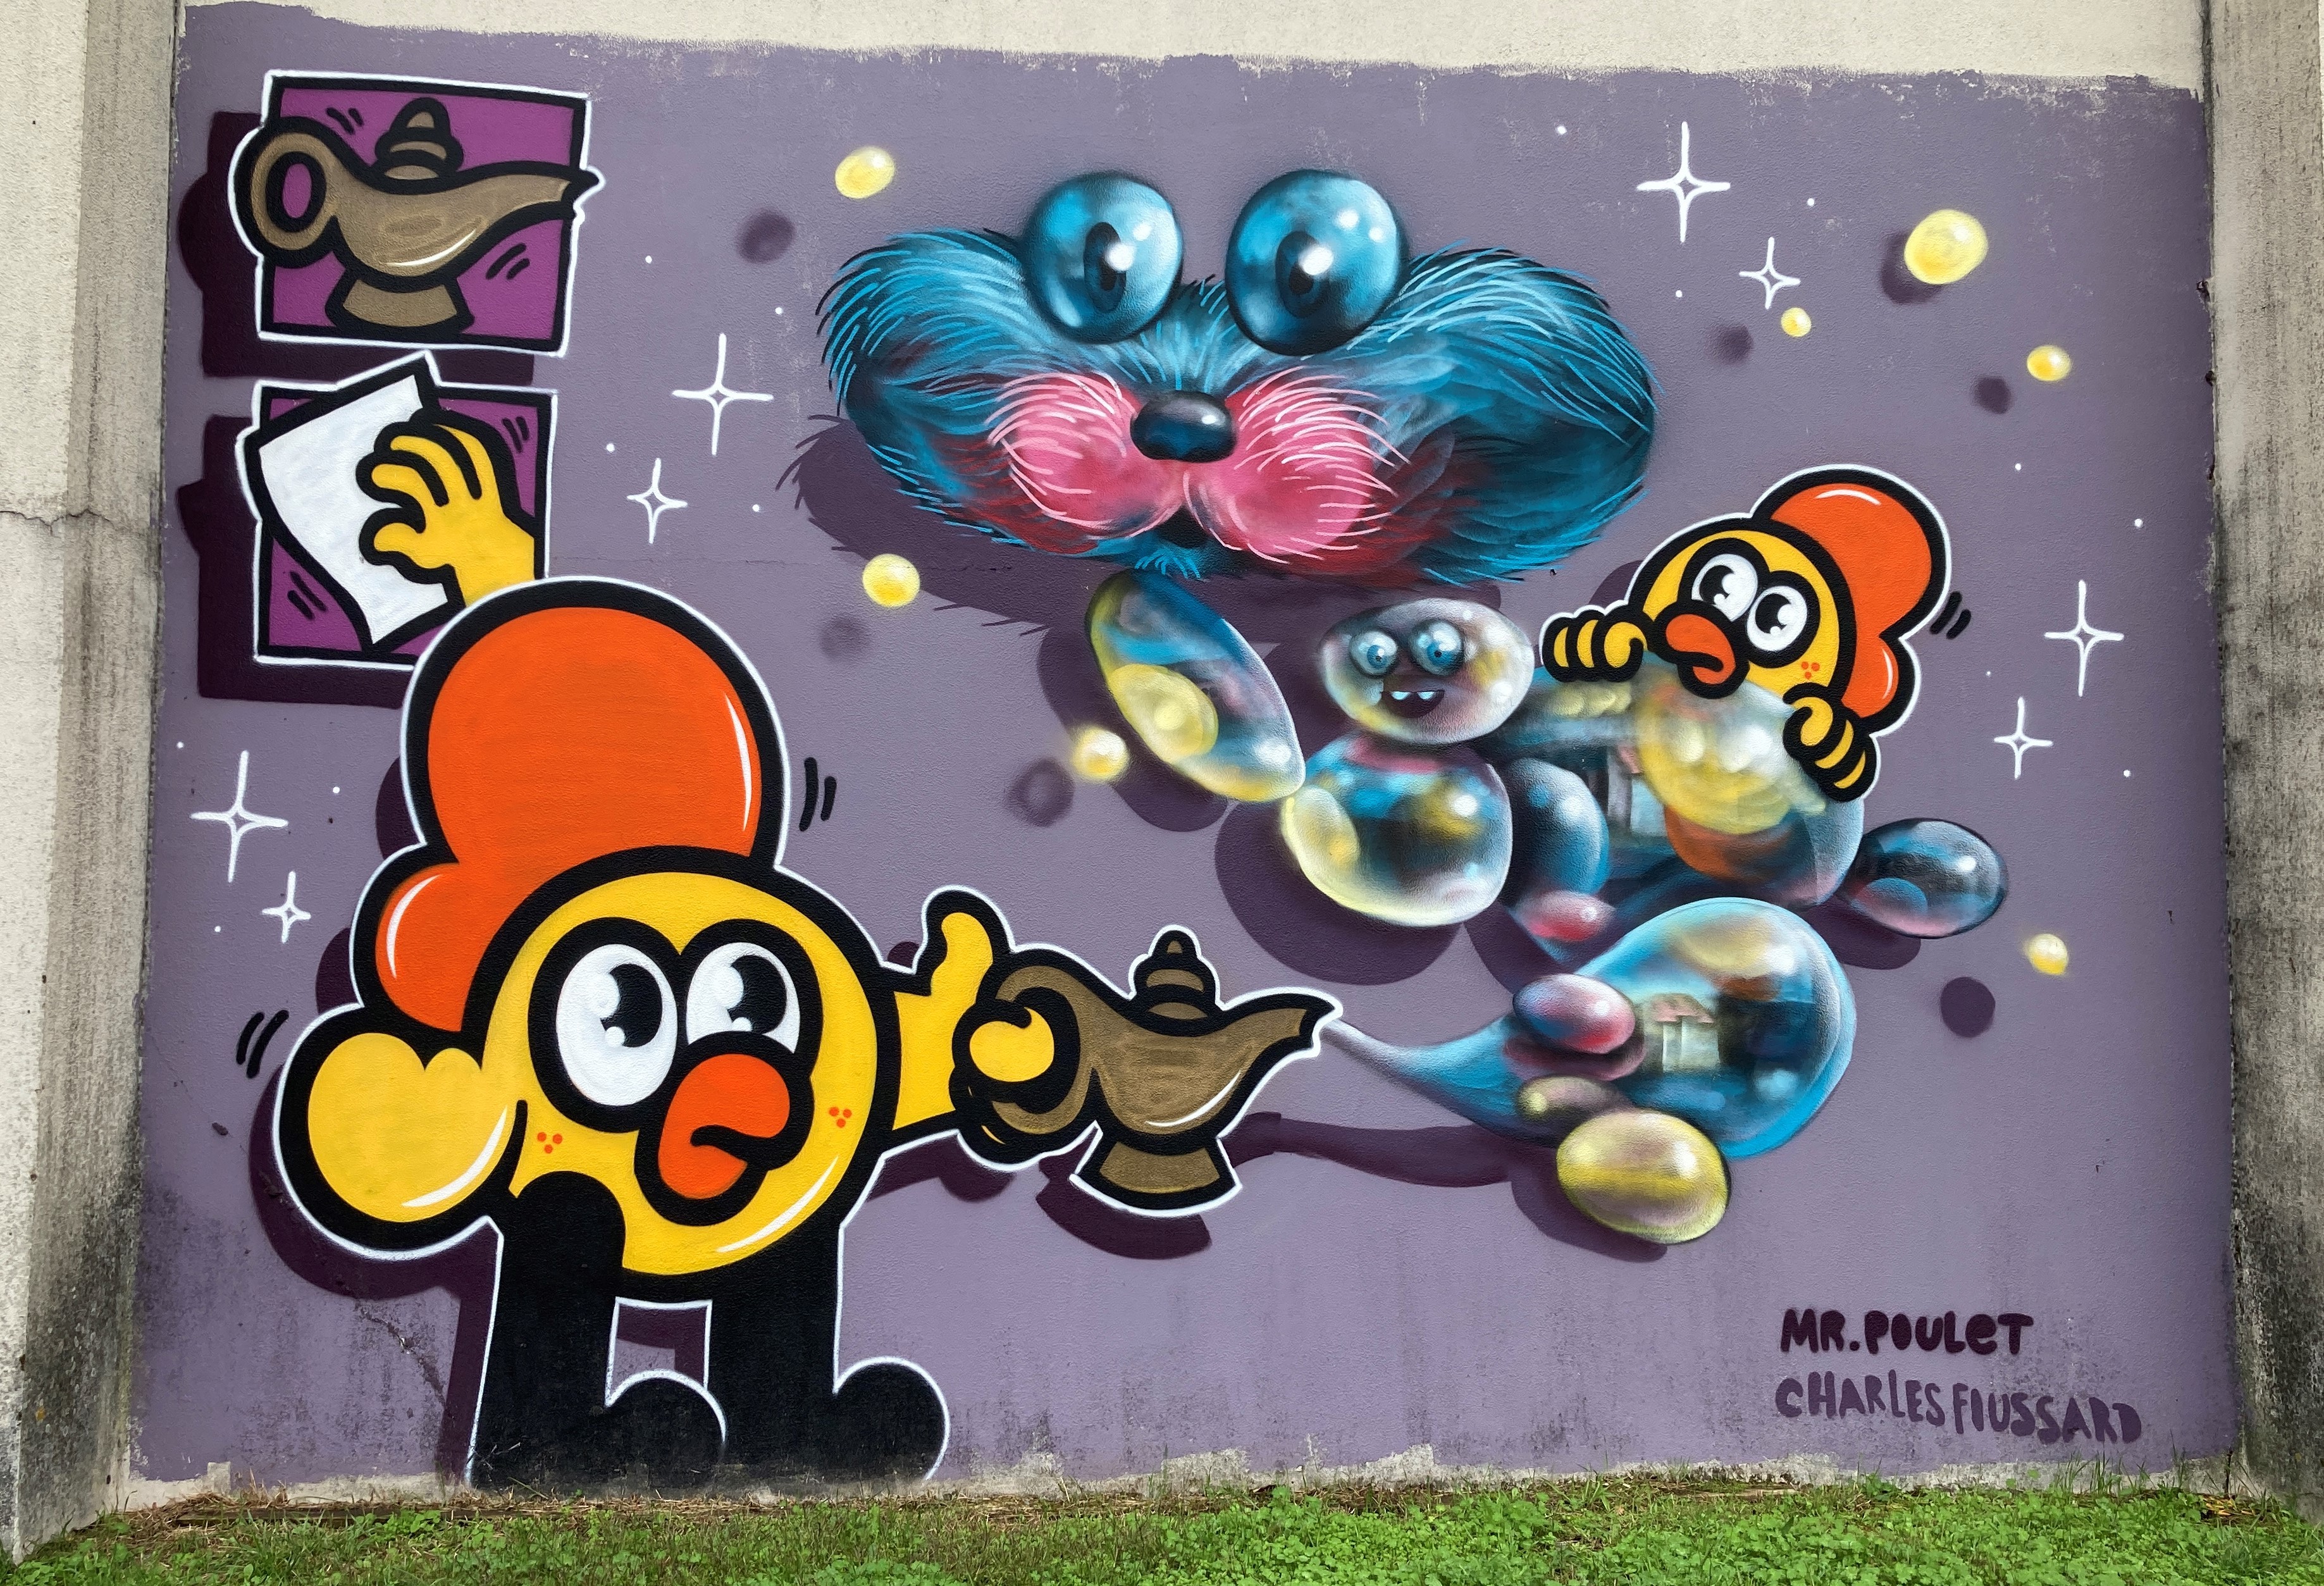 Graffiti 6857 Mr POULET by the artist Charles Foussard captured by Mephisroth in Pessac France